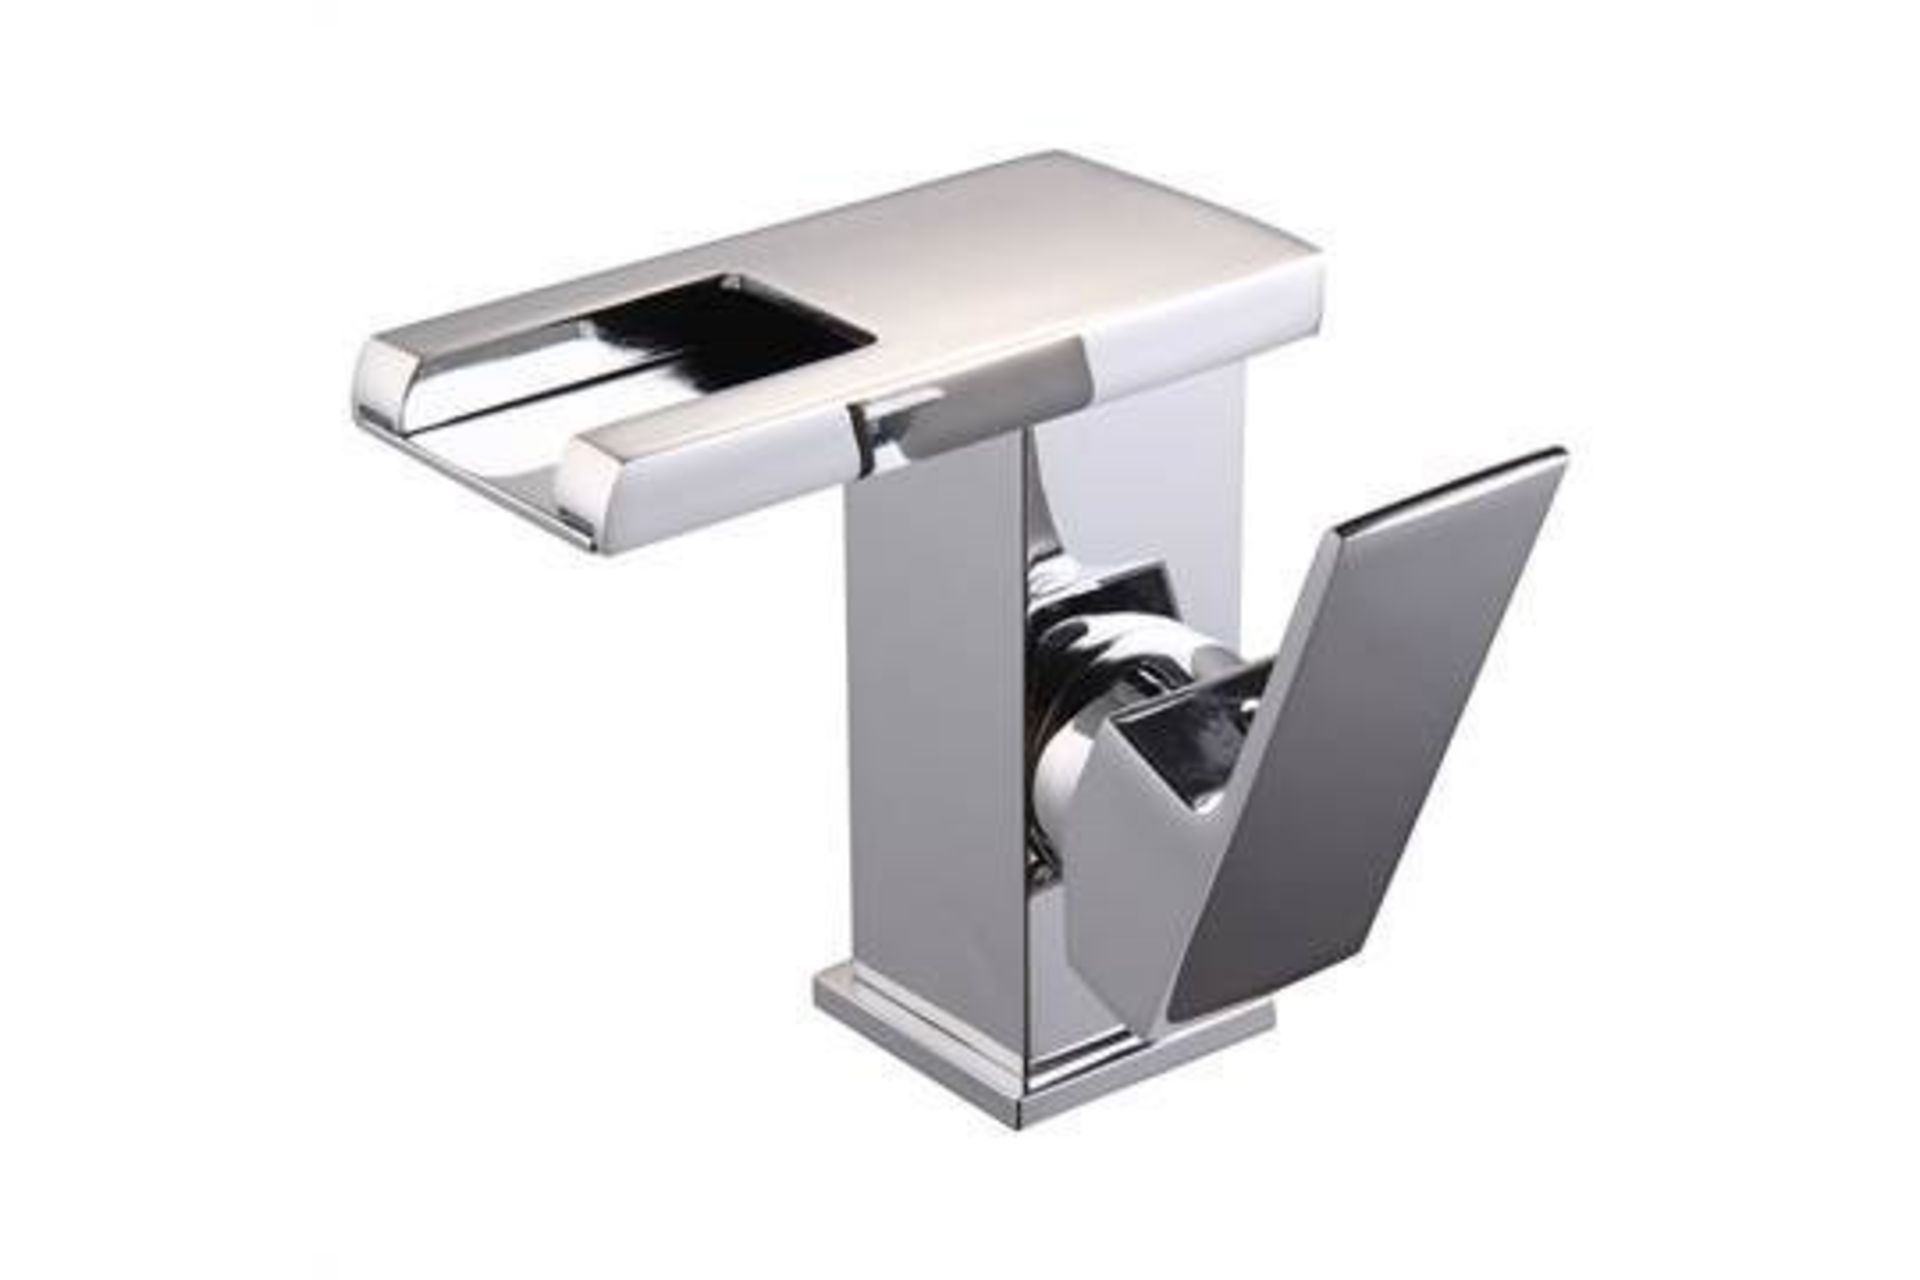 (OS254) LED Waterfall Bathroom Basin Mixer Tap. RRP £229.99. Easy to install and clean. All copper - Image 2 of 3